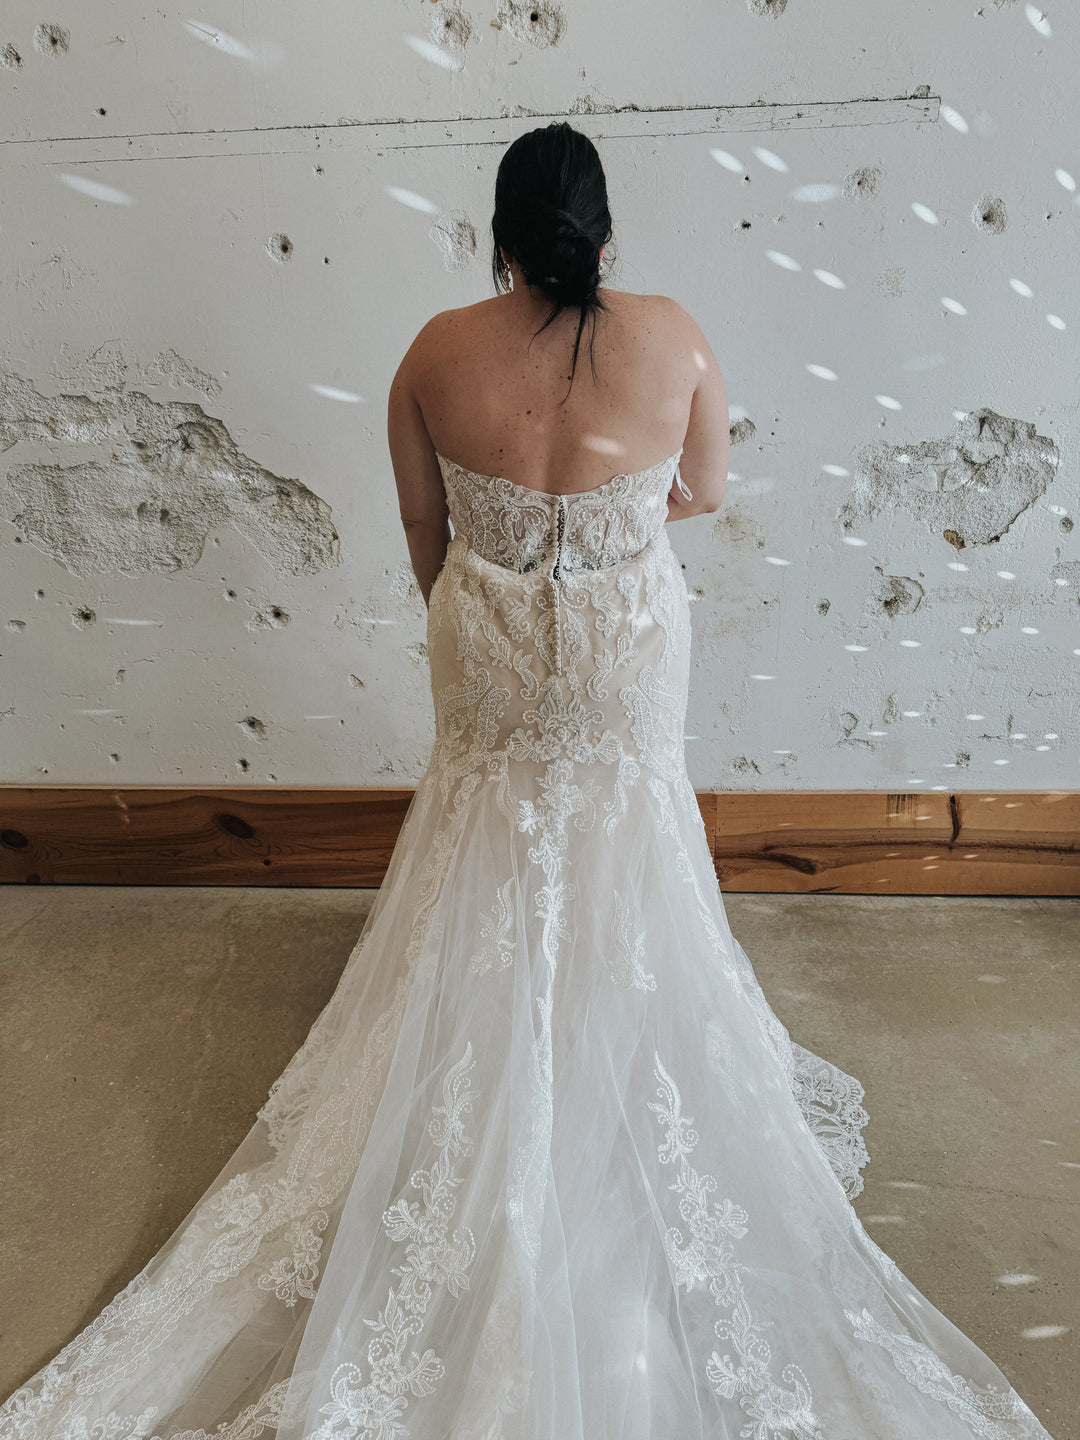 Tag Size 28 | Dearly Loved Bridal